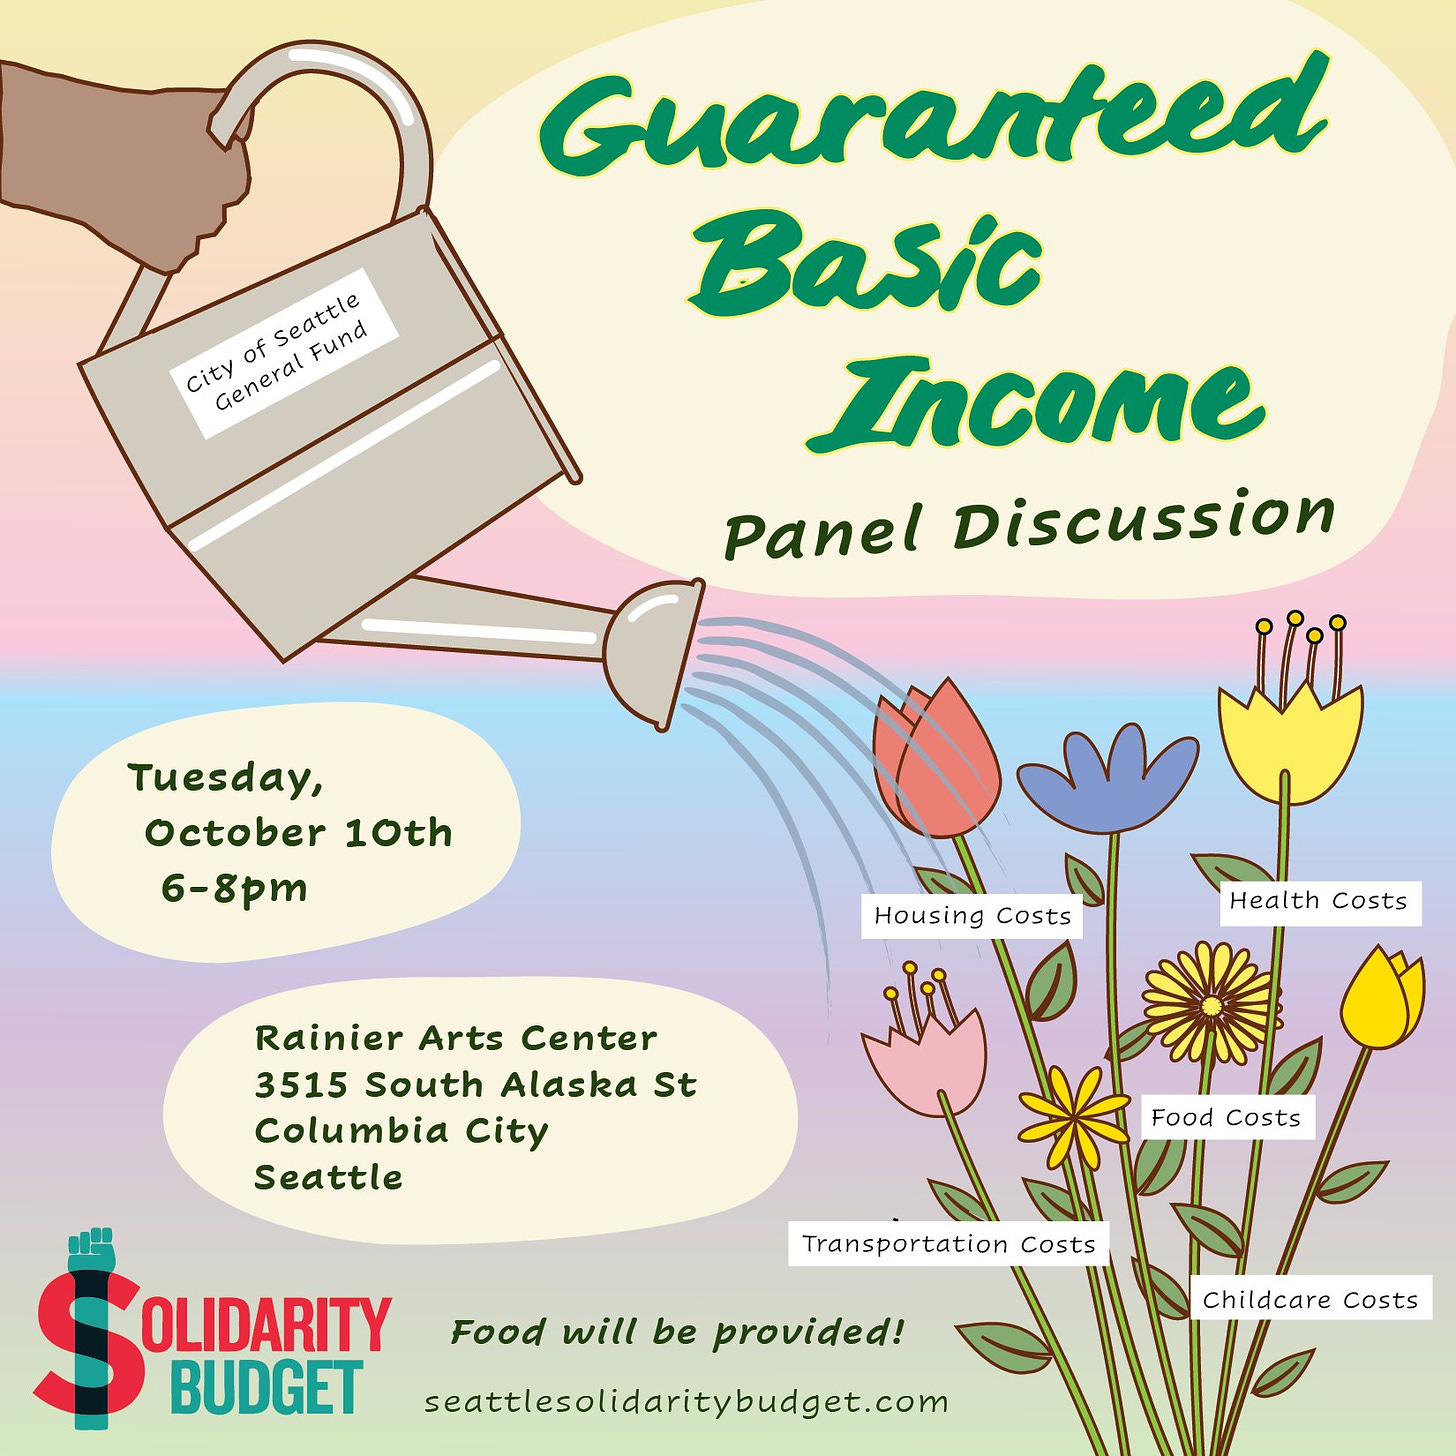 Guaranteed Basic Income panel discussion. Tuesday, October 10th, 6-8pm. Rainier Arts Center 3515 South Alaska St., Columbia City, Seattle. Food will be provided! In the upper-left corner a colorful illustration depicts a hand holding a watering can labeled “City of Seattle General Fund.” The can pours stylized water onto a group of colorful flowers in the lower right corner, which are labeled “housing costs”, “health costs”, “food costs”, “childcare costs”, and “transportation costs”. In the lower-left corner is the Solidarity Budget logo: a green upraised fist intersects a red uppercase “S” to evoke a dollar sign. Next to the logo is the url: seattlesolidaritybudget.com